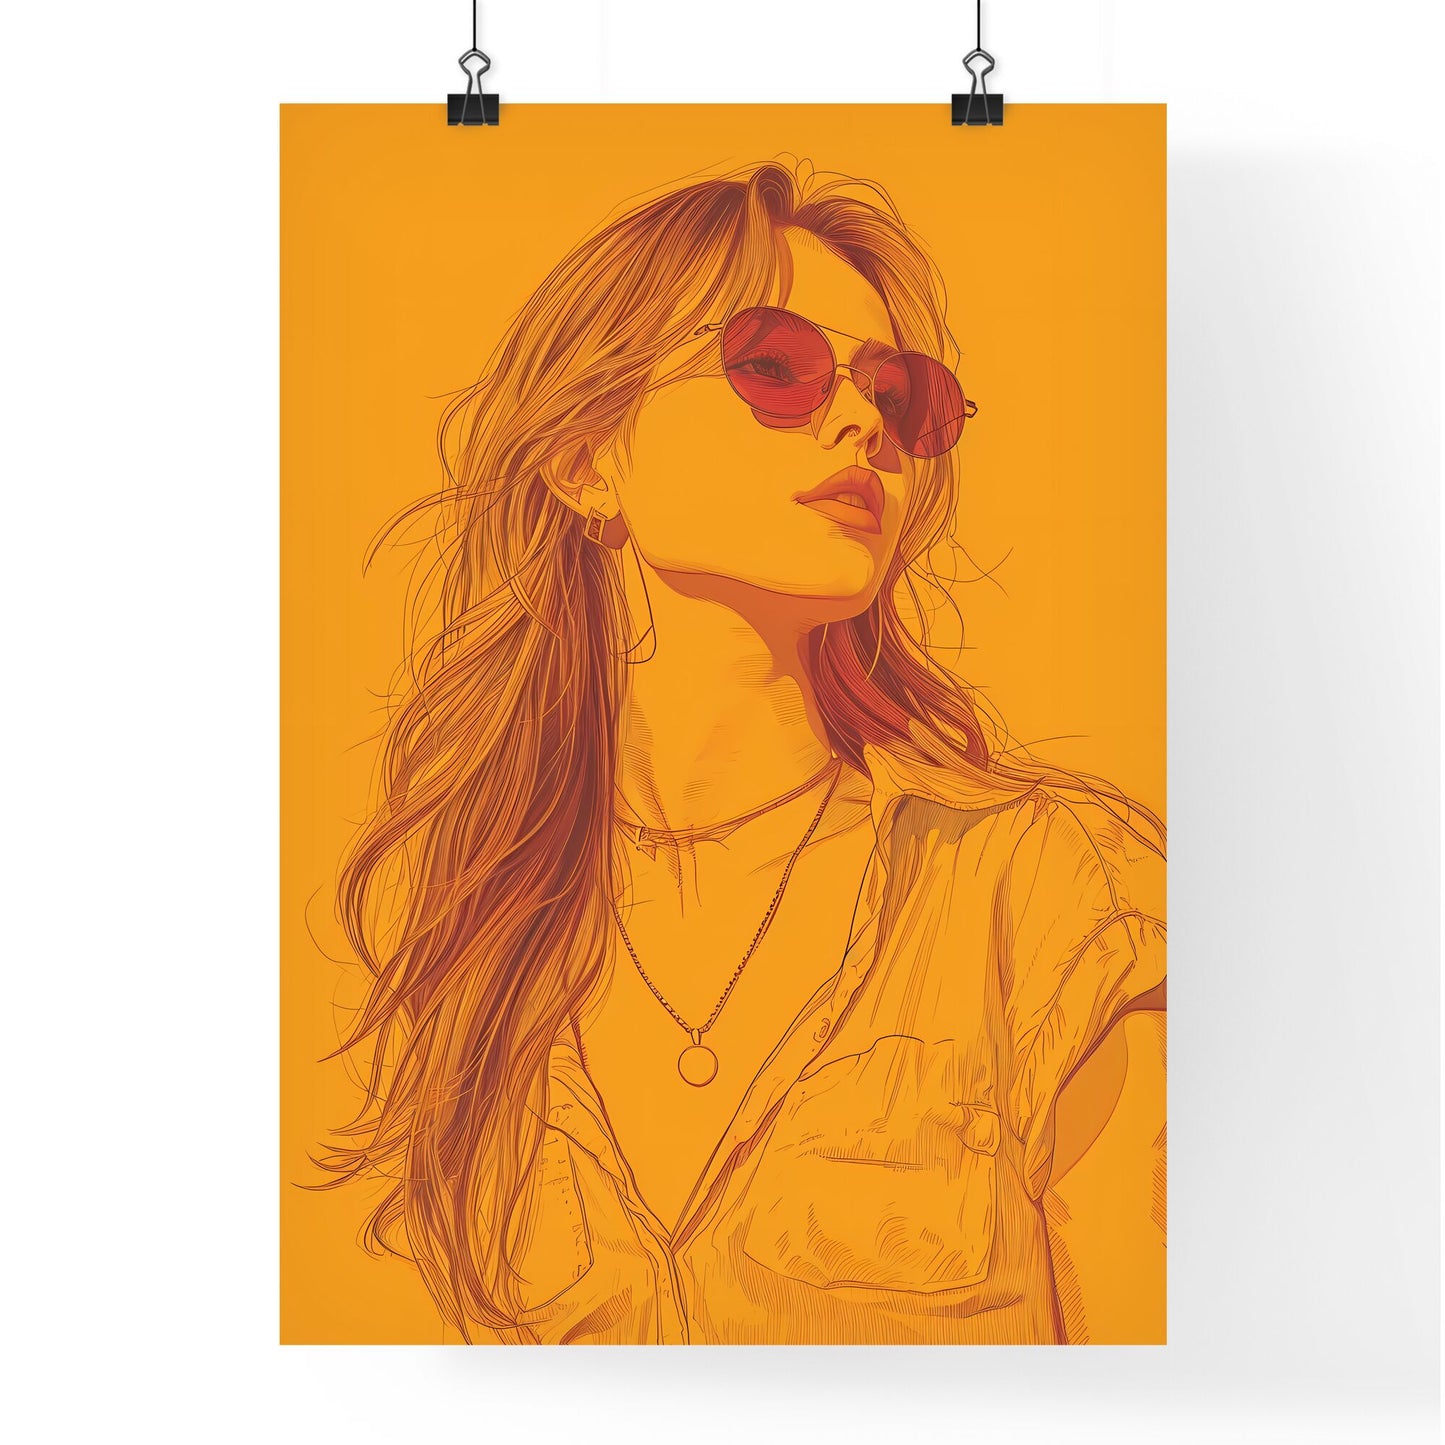 A continous one line minimalist illustration of a pretty girl - Art print of a woman wearing sunglasses and a necklace Default Title